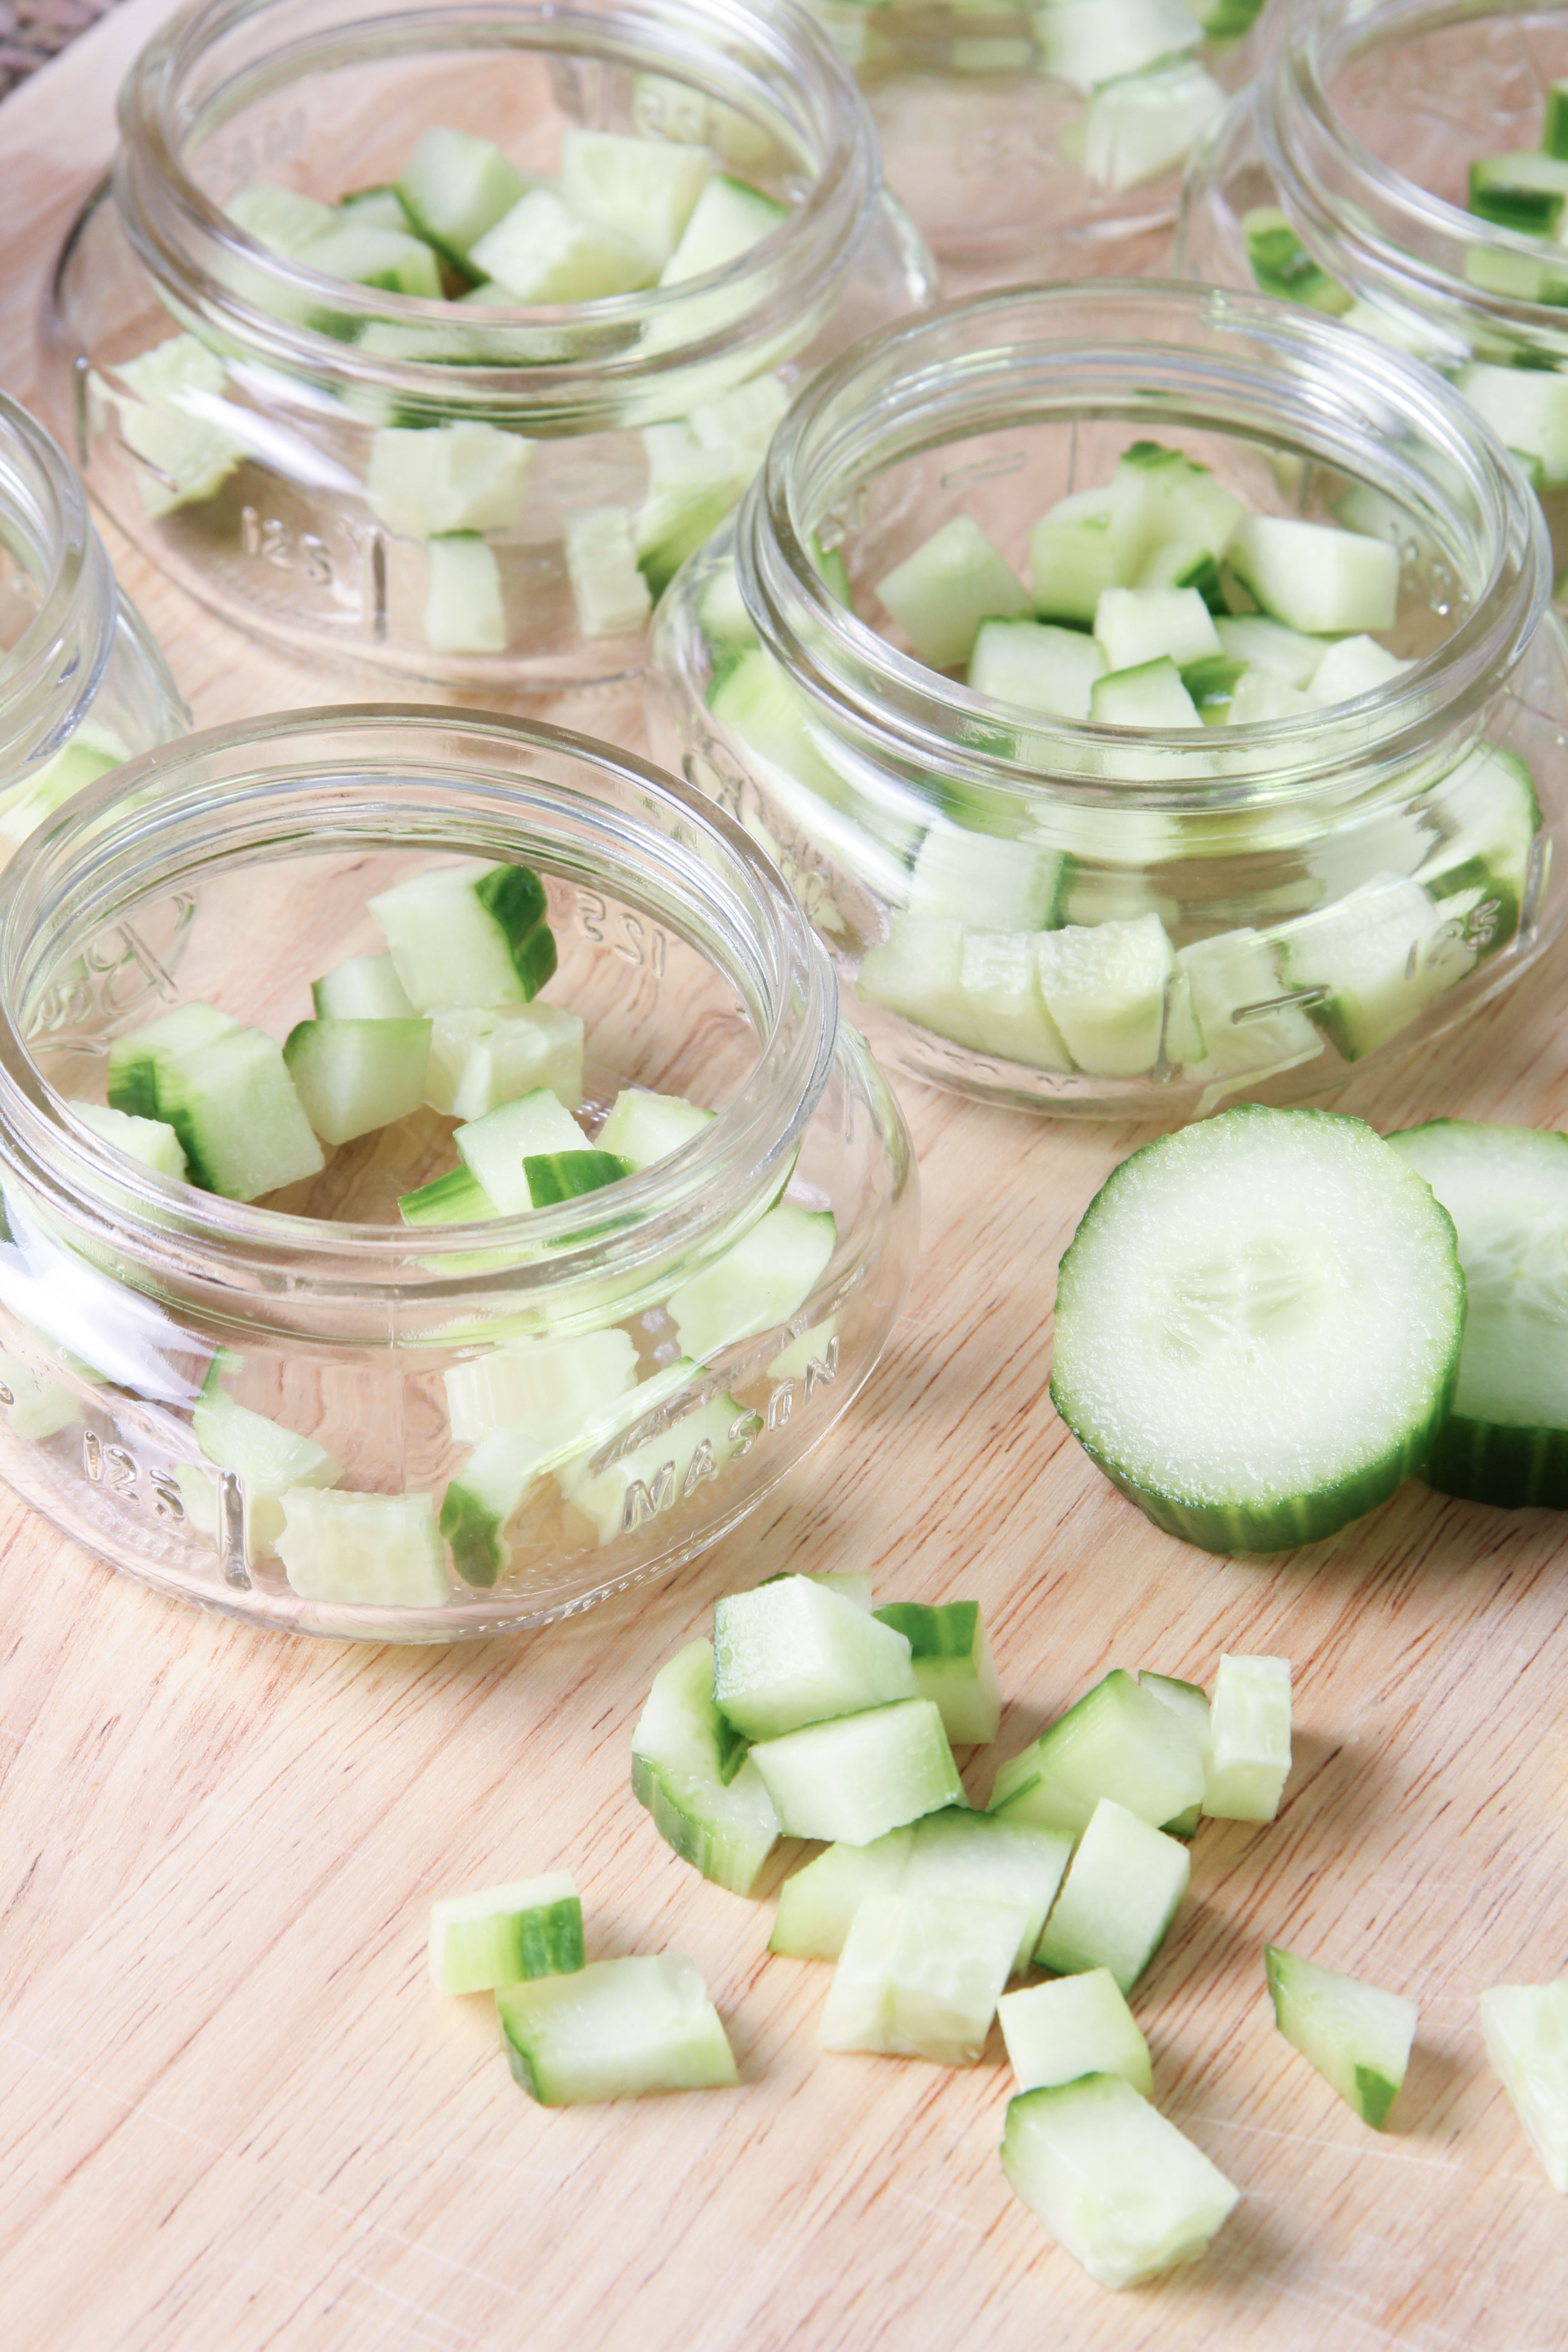 Diced Cucumbers placed in wide mouth mason jars for Chilled Cucumber Dill and Yogurt Soup. Preparing Individual portions of the soup for a beach picnic.